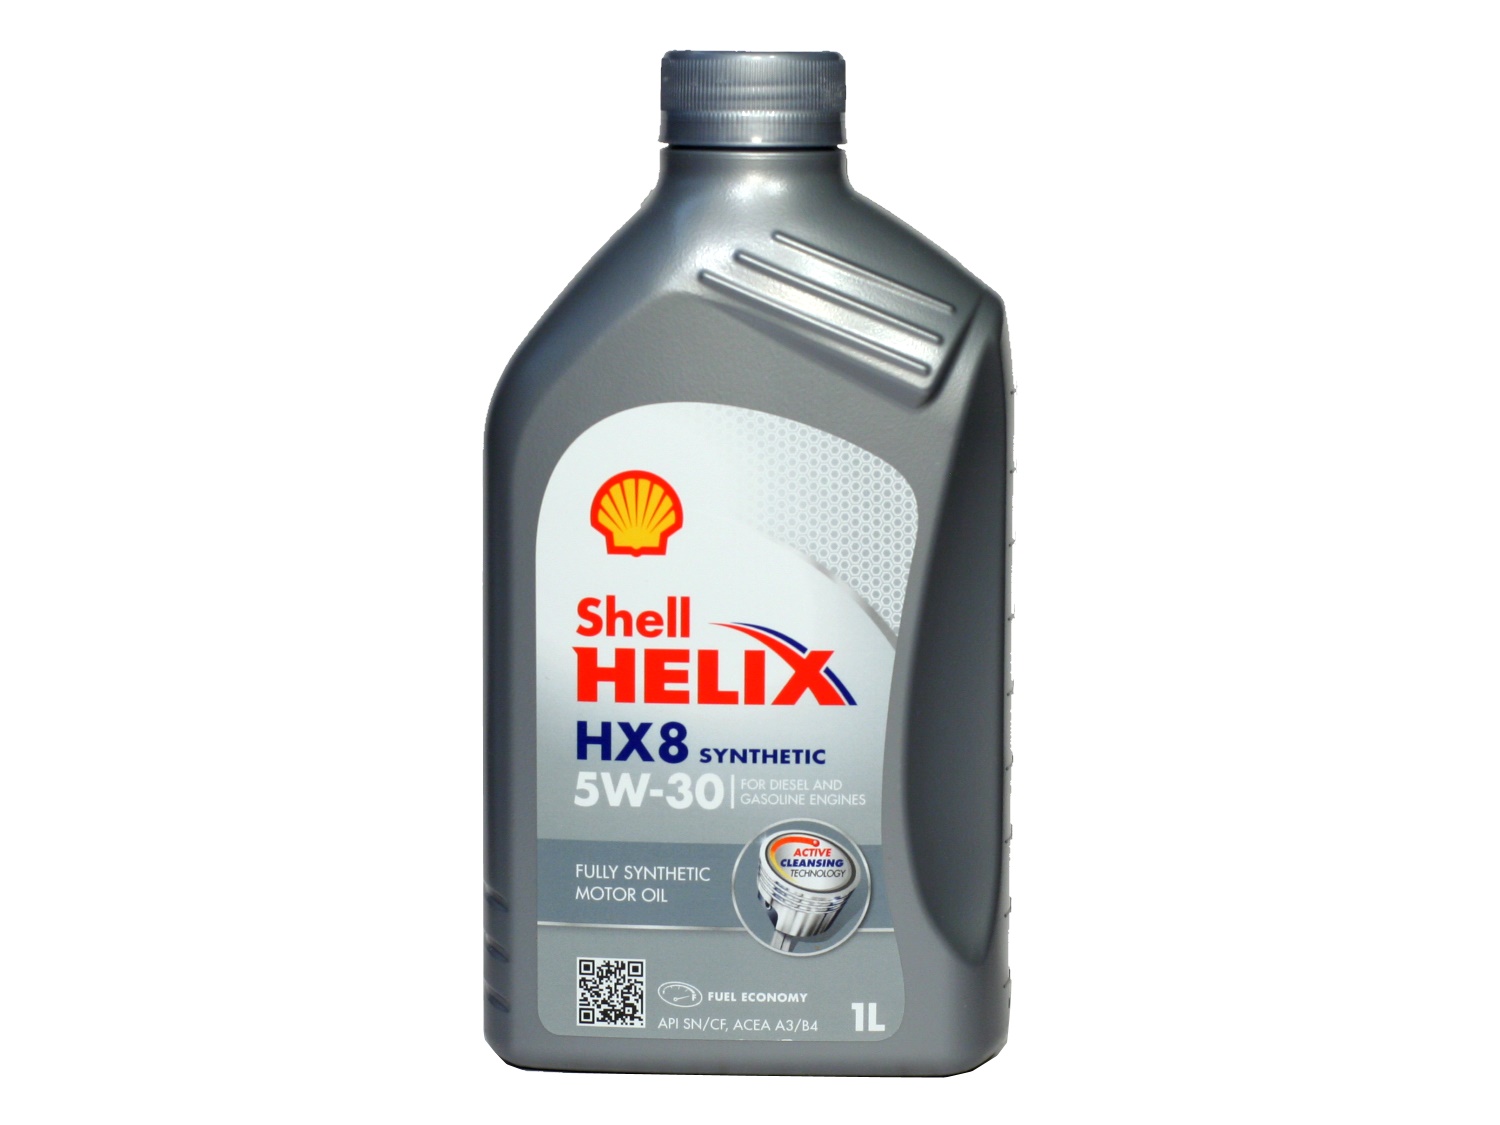 SHELL Helix HX8 Synthetic 5W-30 1 л